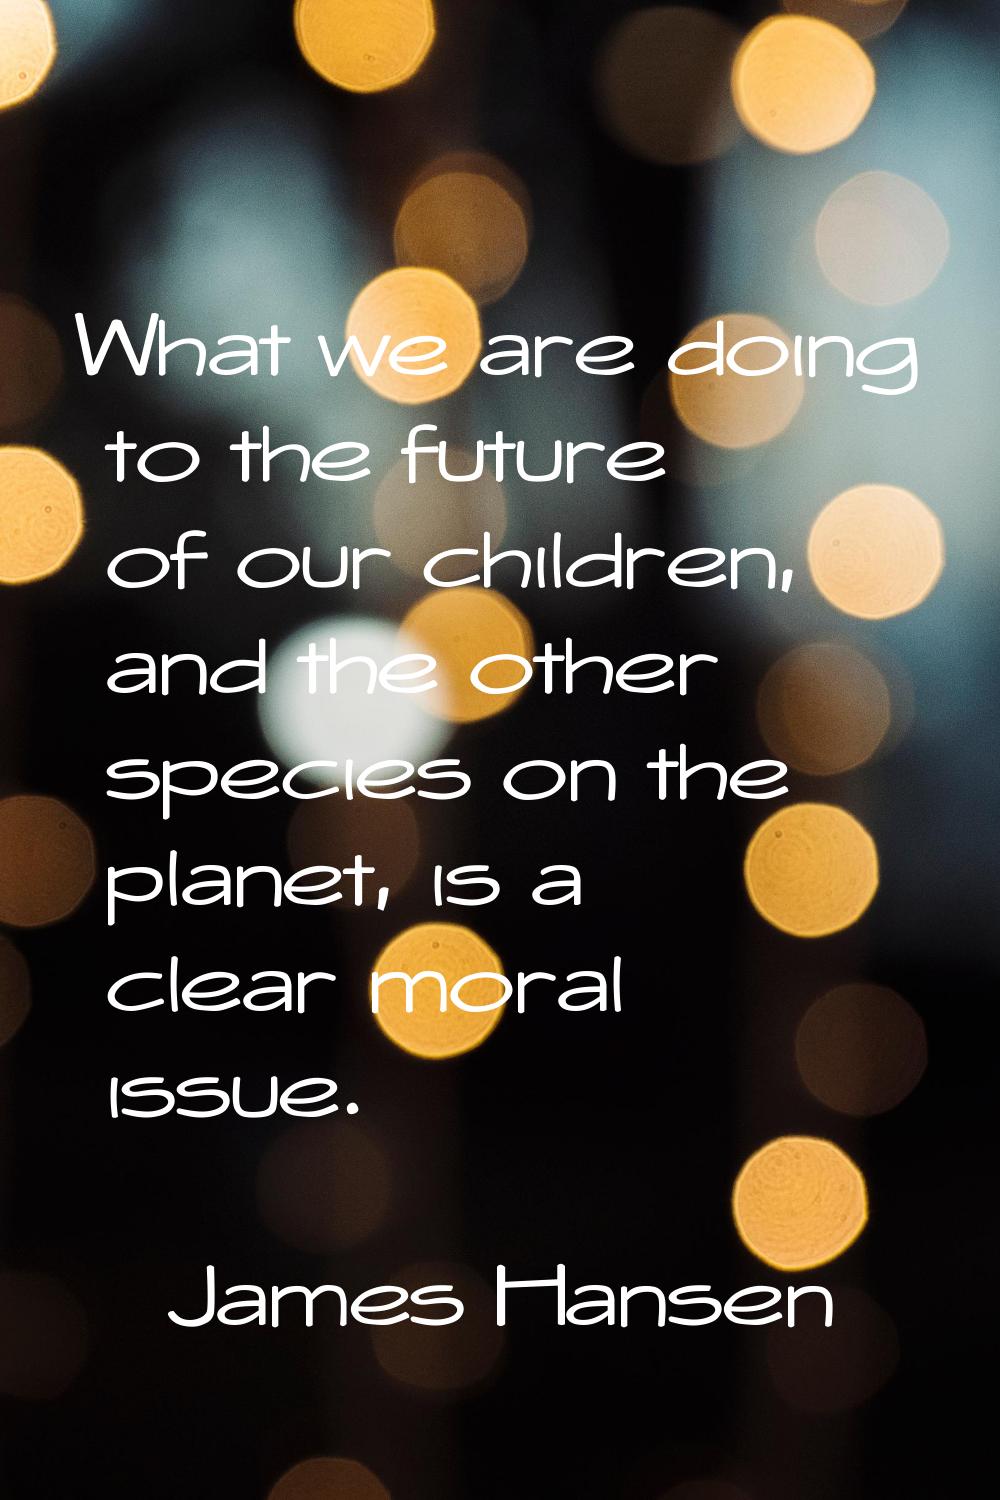 What we are doing to the future of our children, and the other species on the planet, is a clear mo